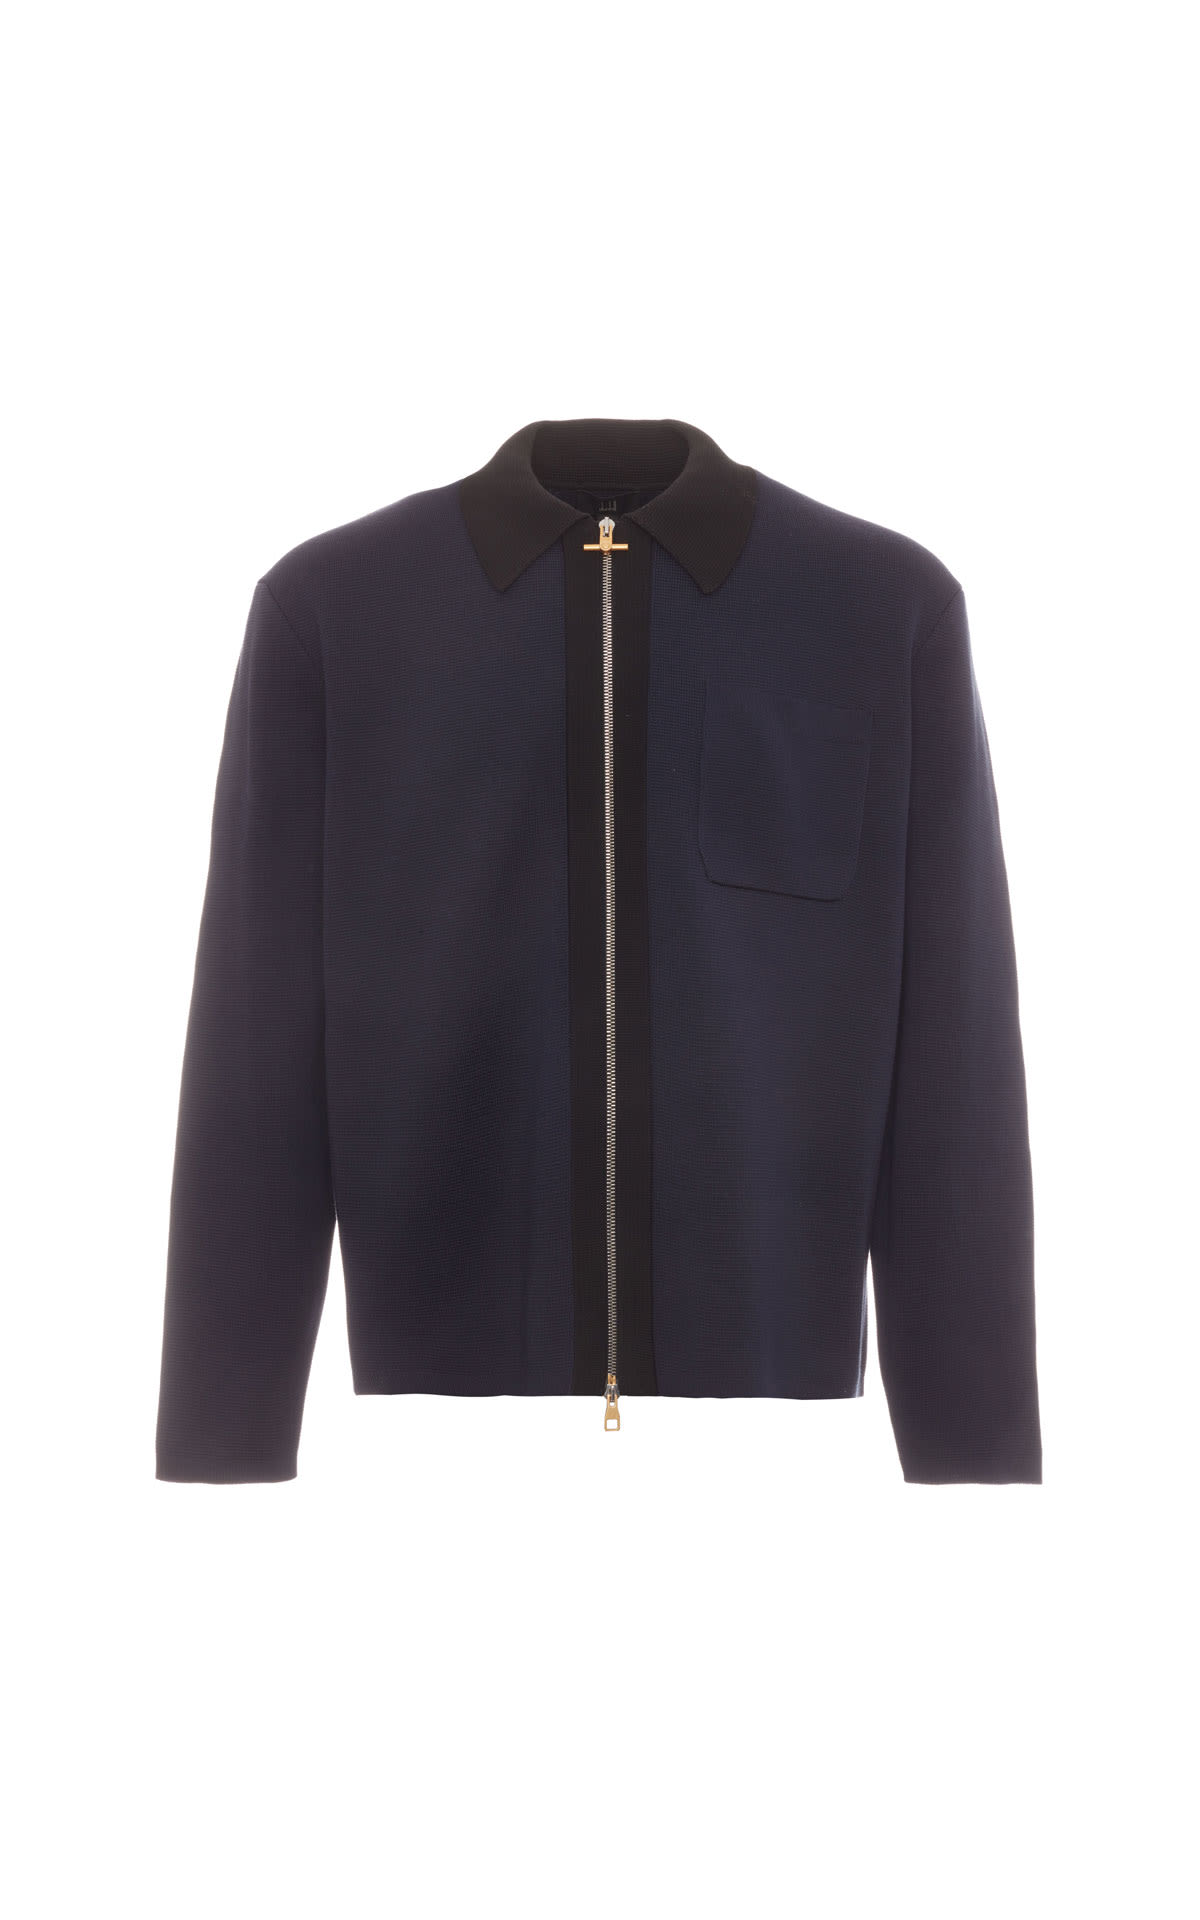 dunhill Zip overshirt jacket from Bicester Village